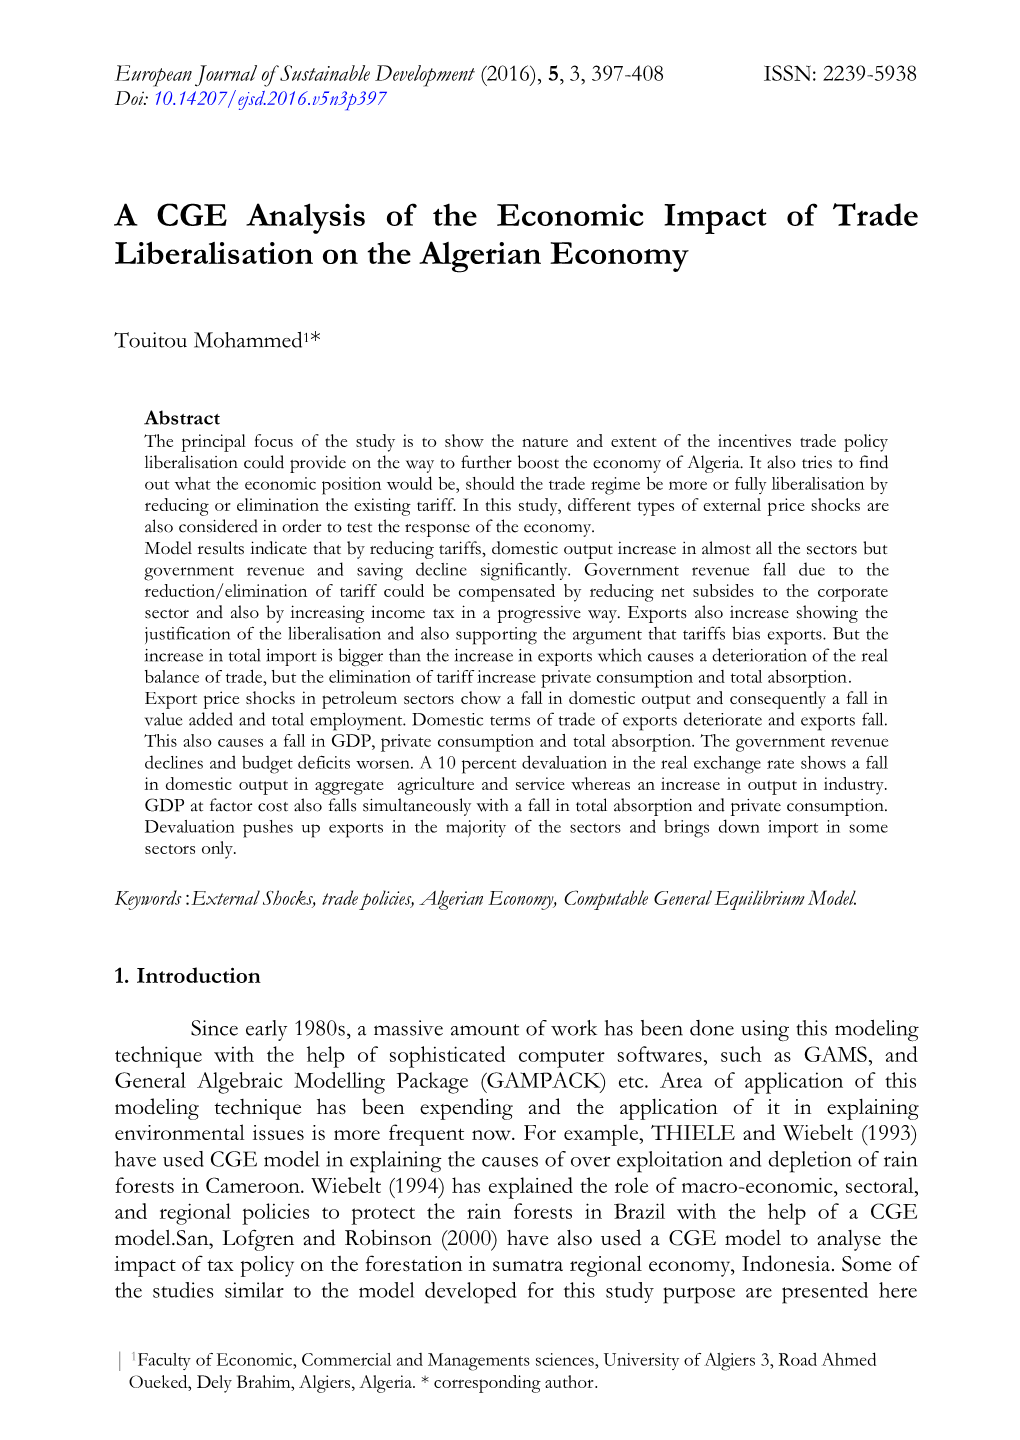 A CGE Analysis of the Economic Impact of Trade Liberalisation on the Algerian Economy